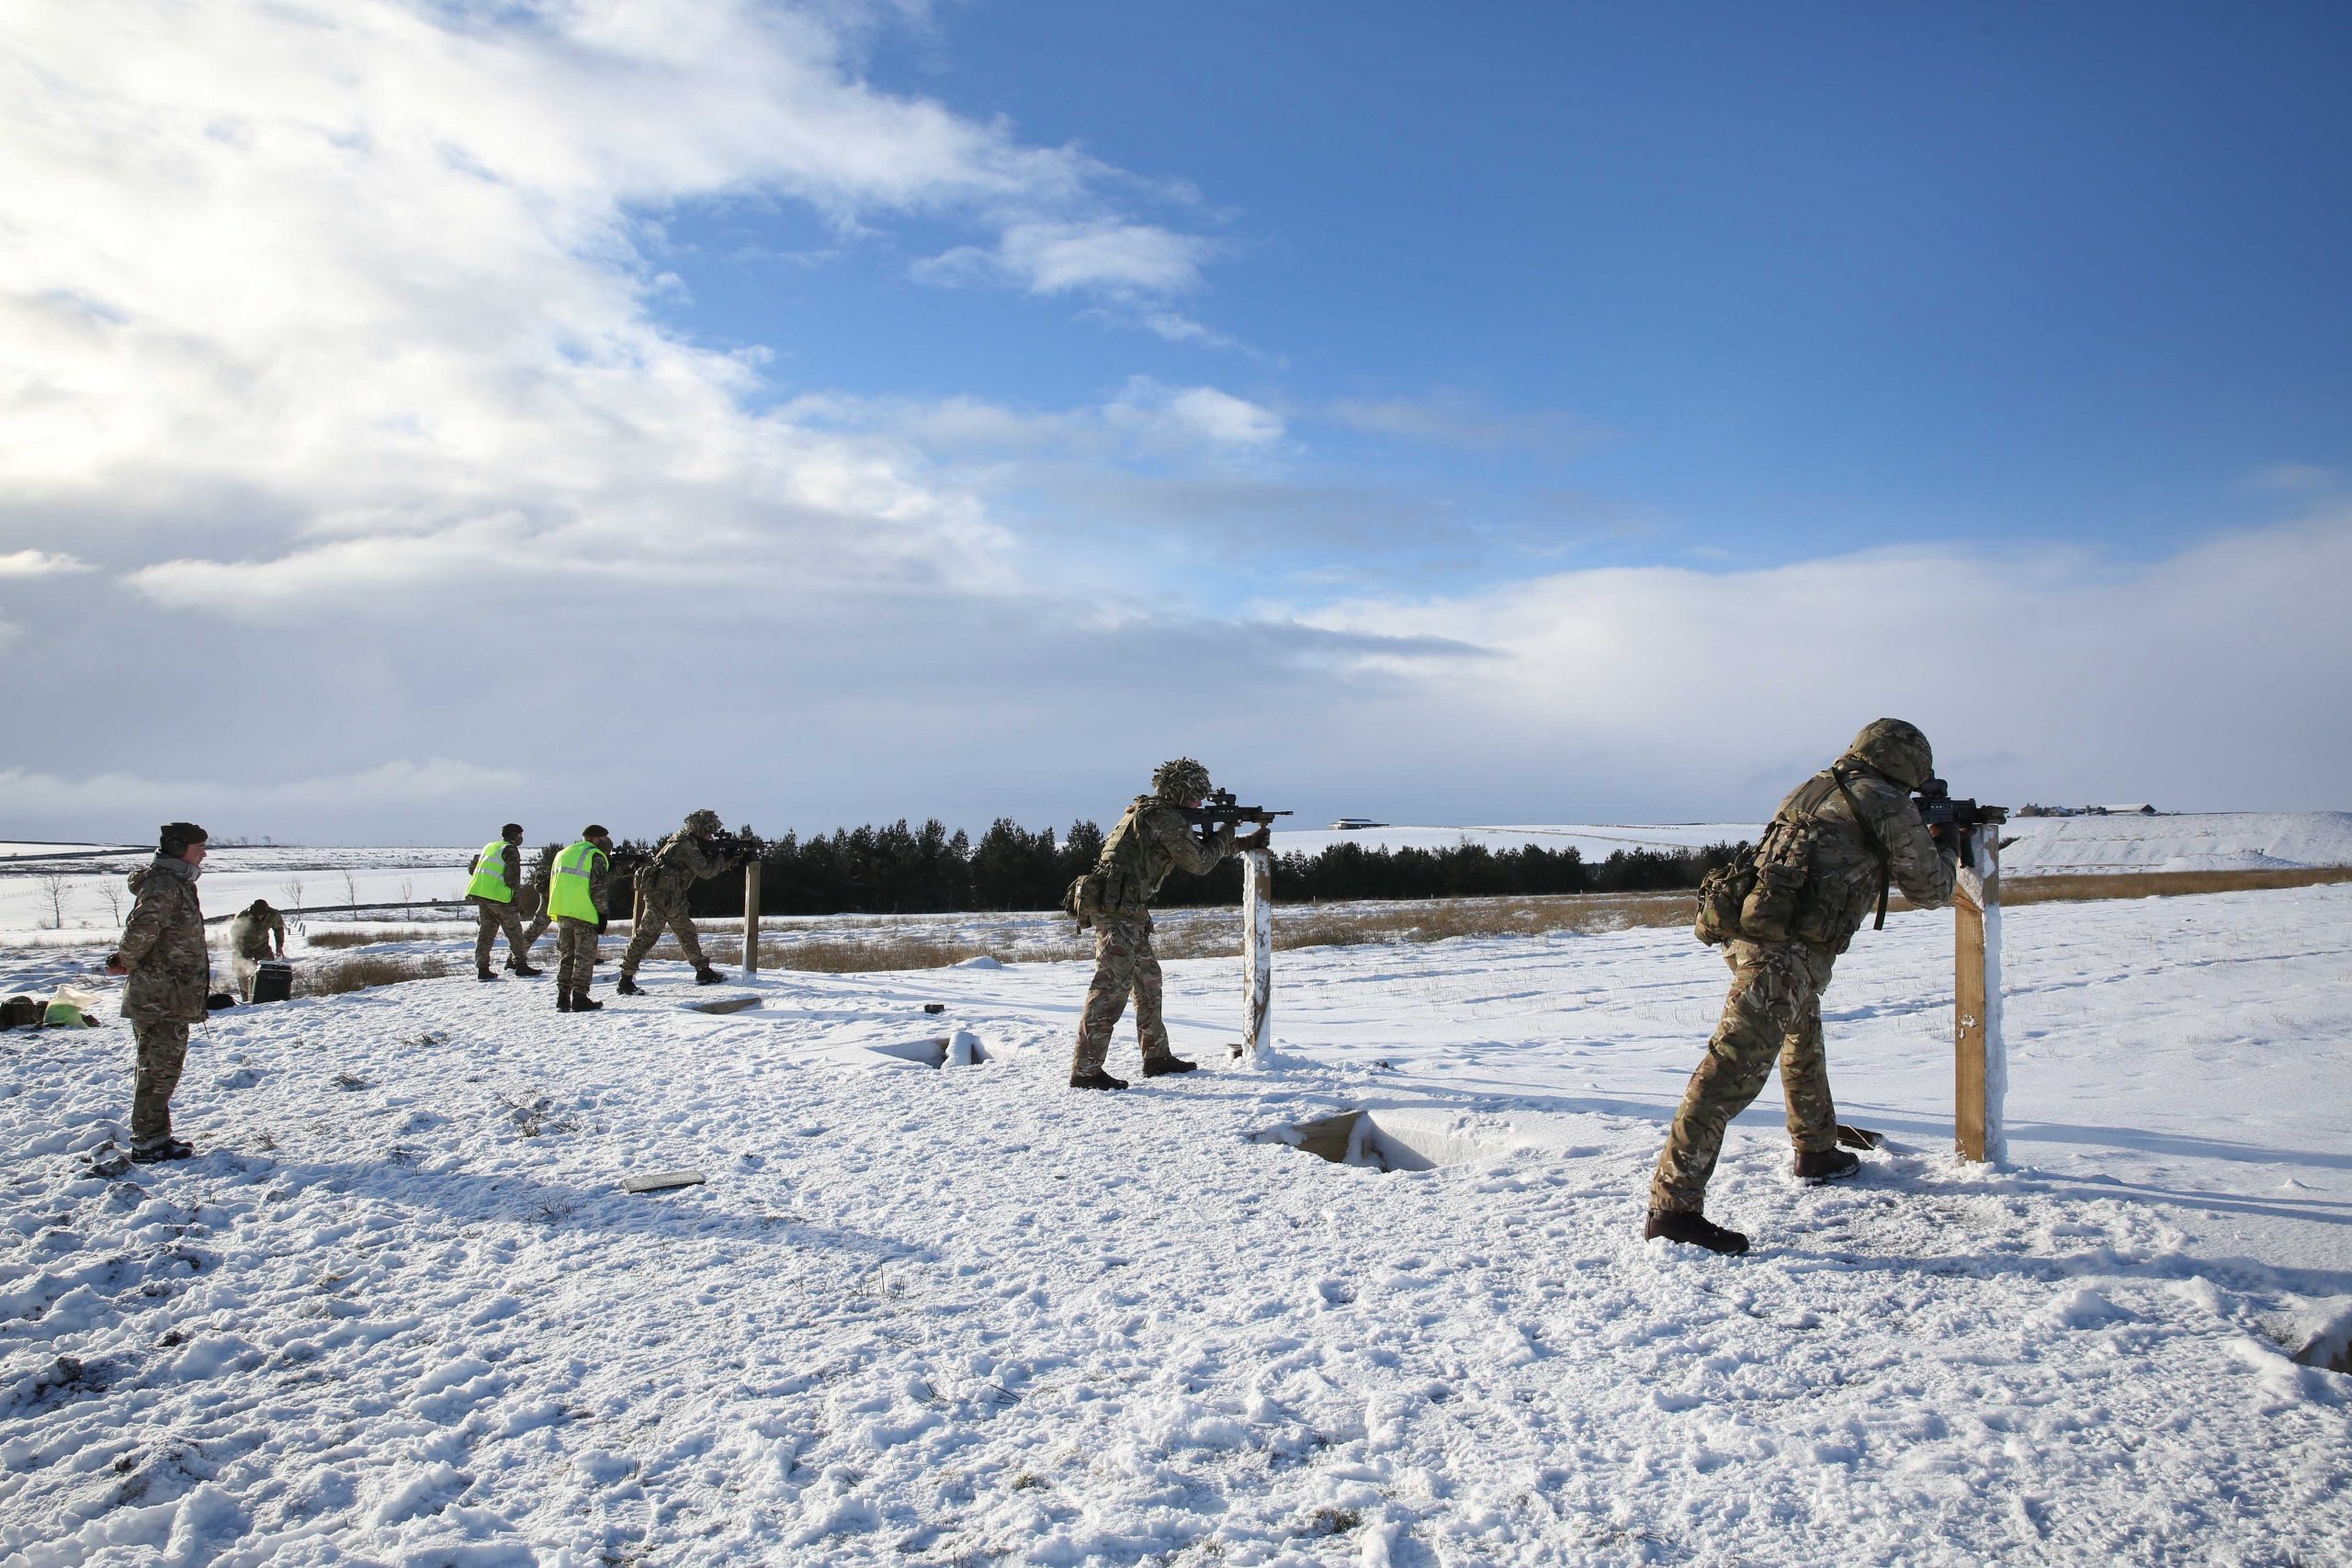 Reservists practice shooting at Battle Hill Range